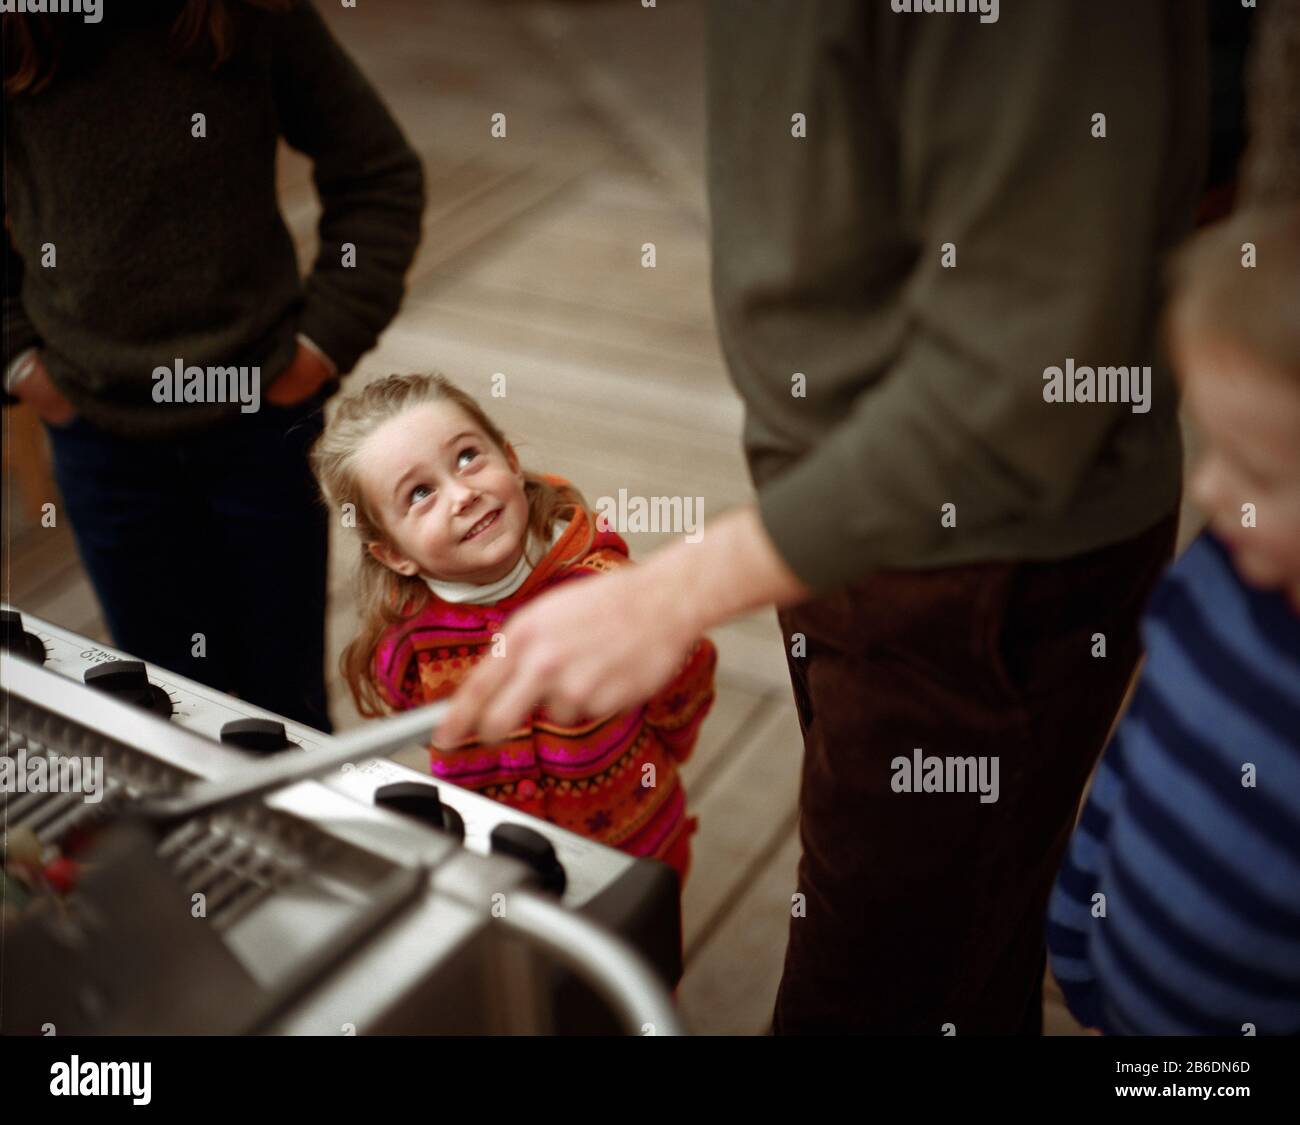 View of a small girl smiling while a man prepares barbecue. Stock Photo